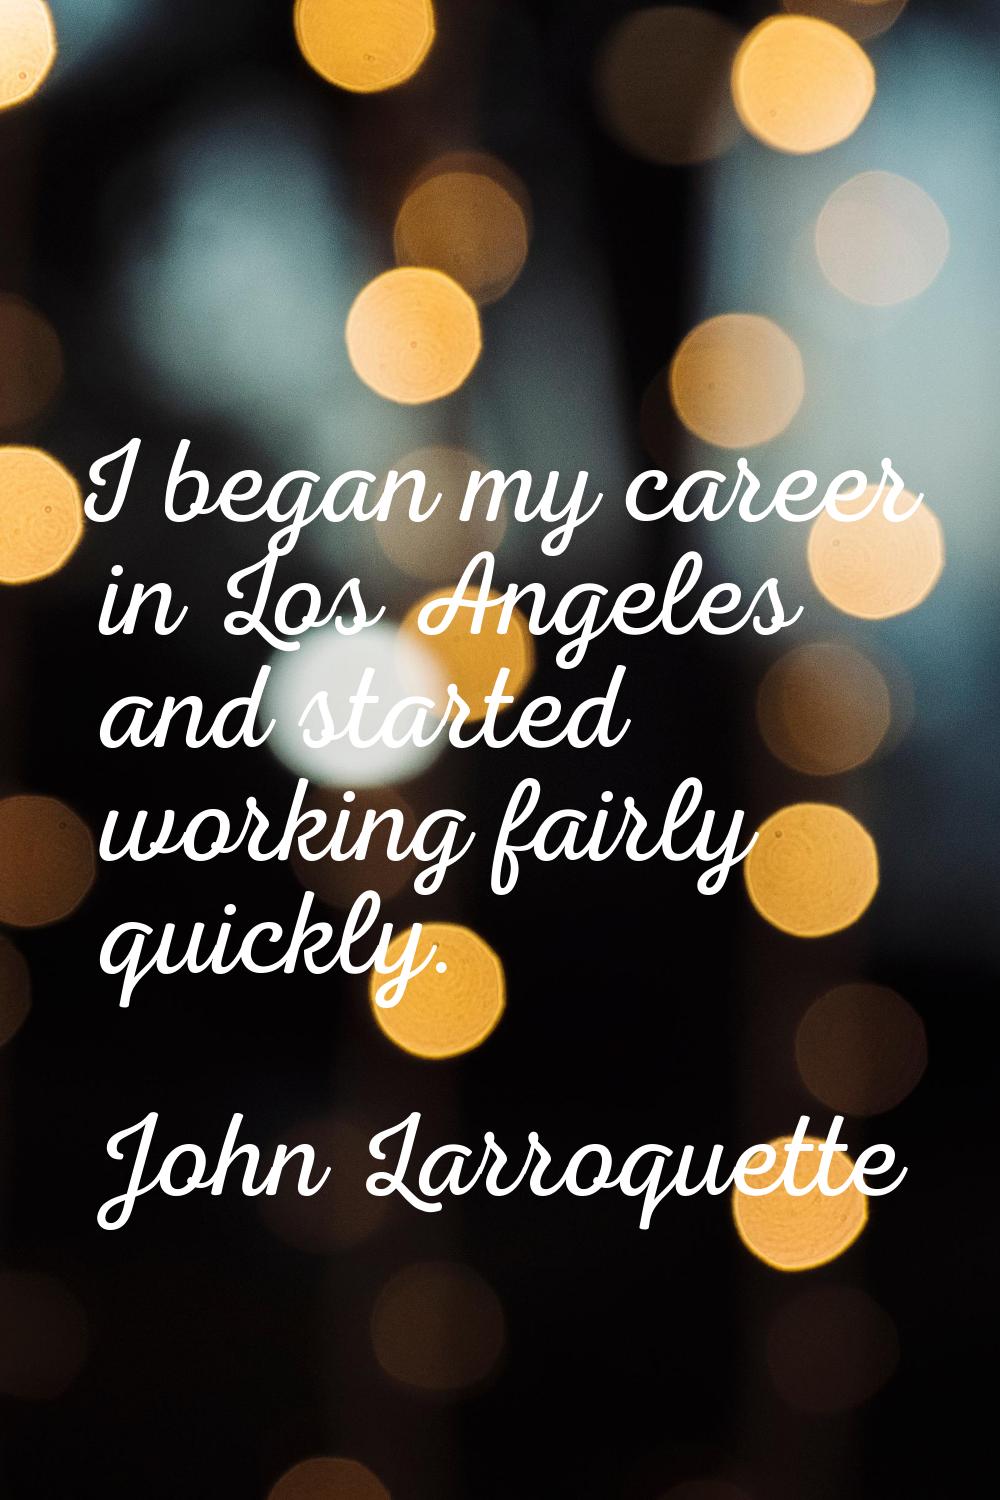 I began my career in Los Angeles and started working fairly quickly.